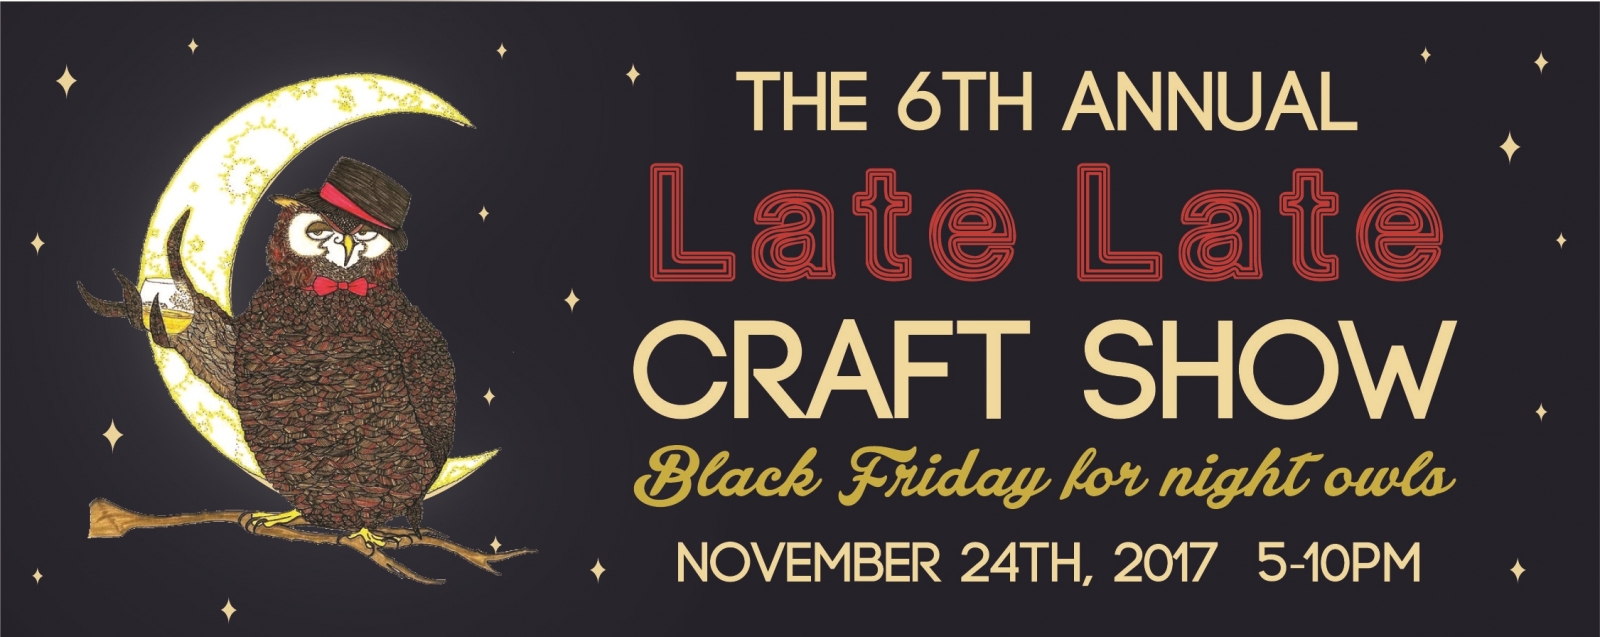 Late Late Craft Show 2017 Chicago